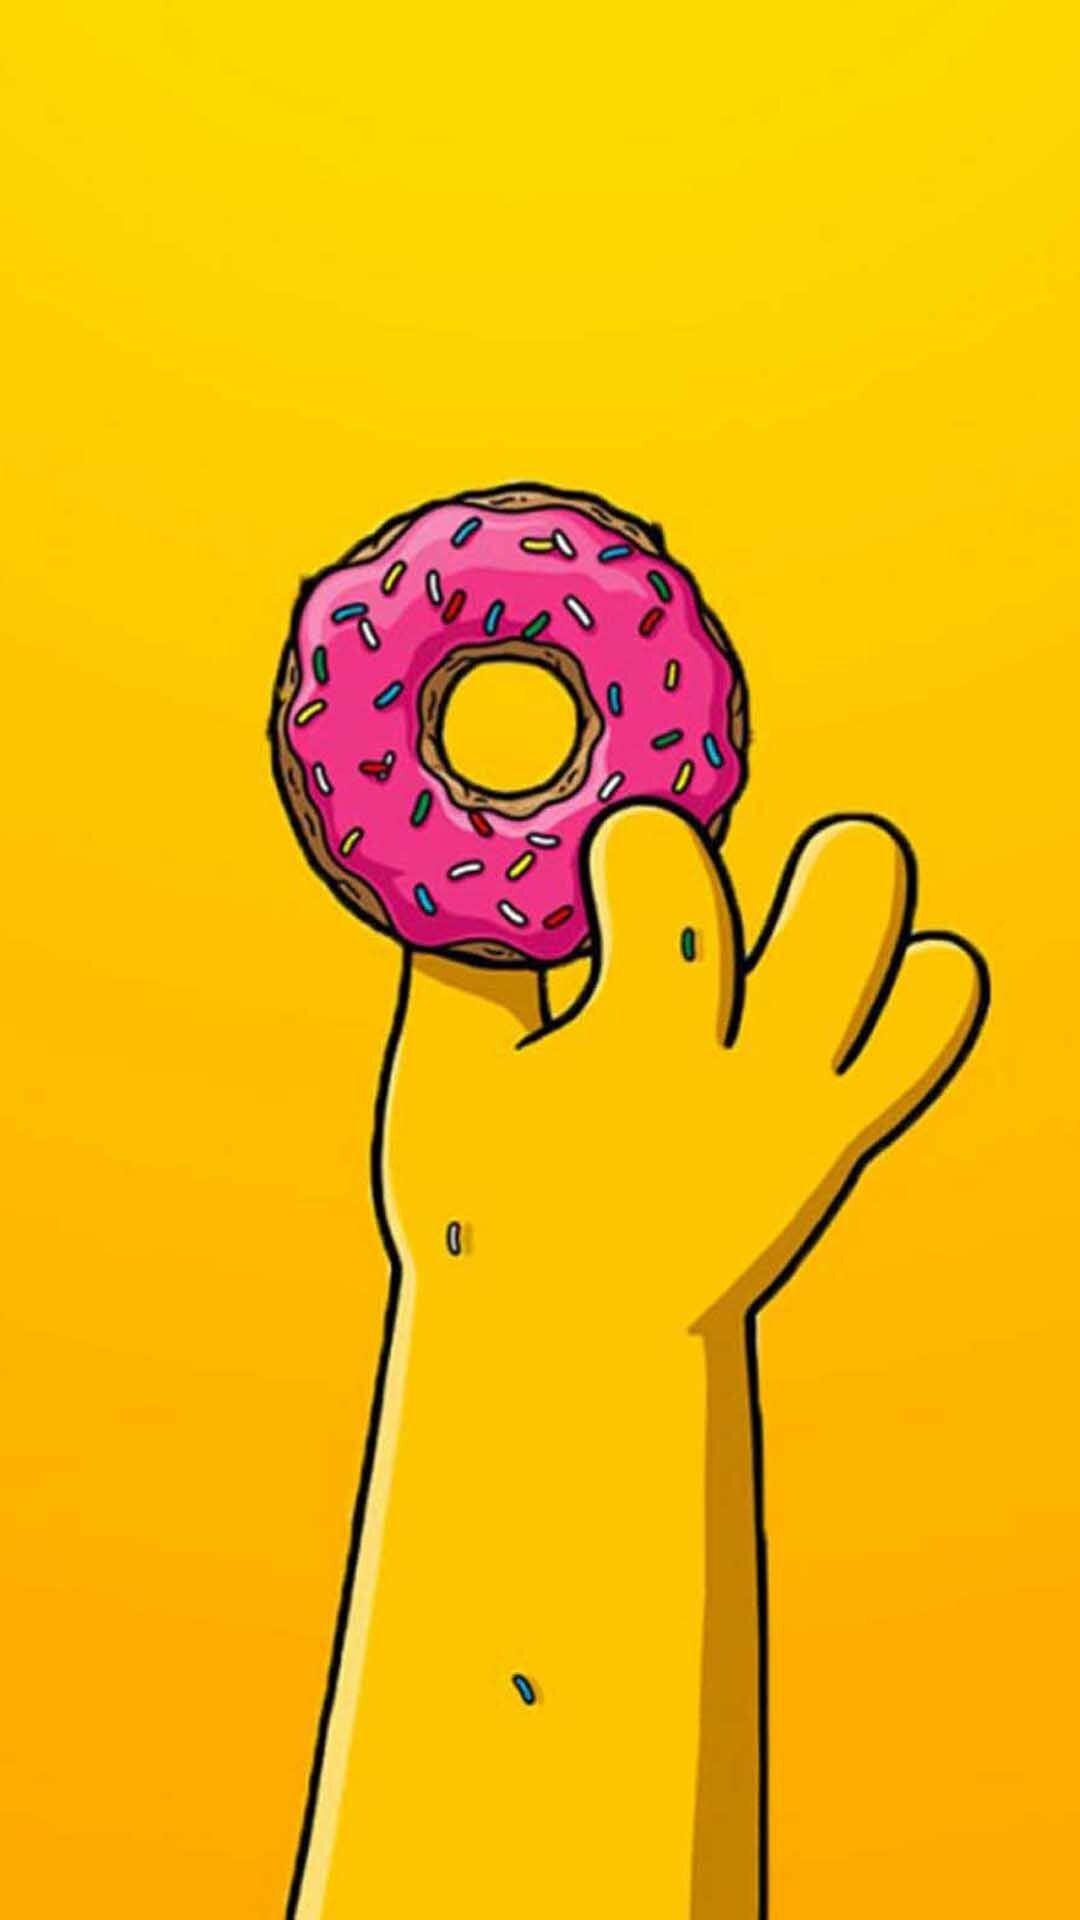 The Simpsons: Homer and donut, IGN's number one 90s cartoon character. 1080x1920 Full HD Wallpaper.